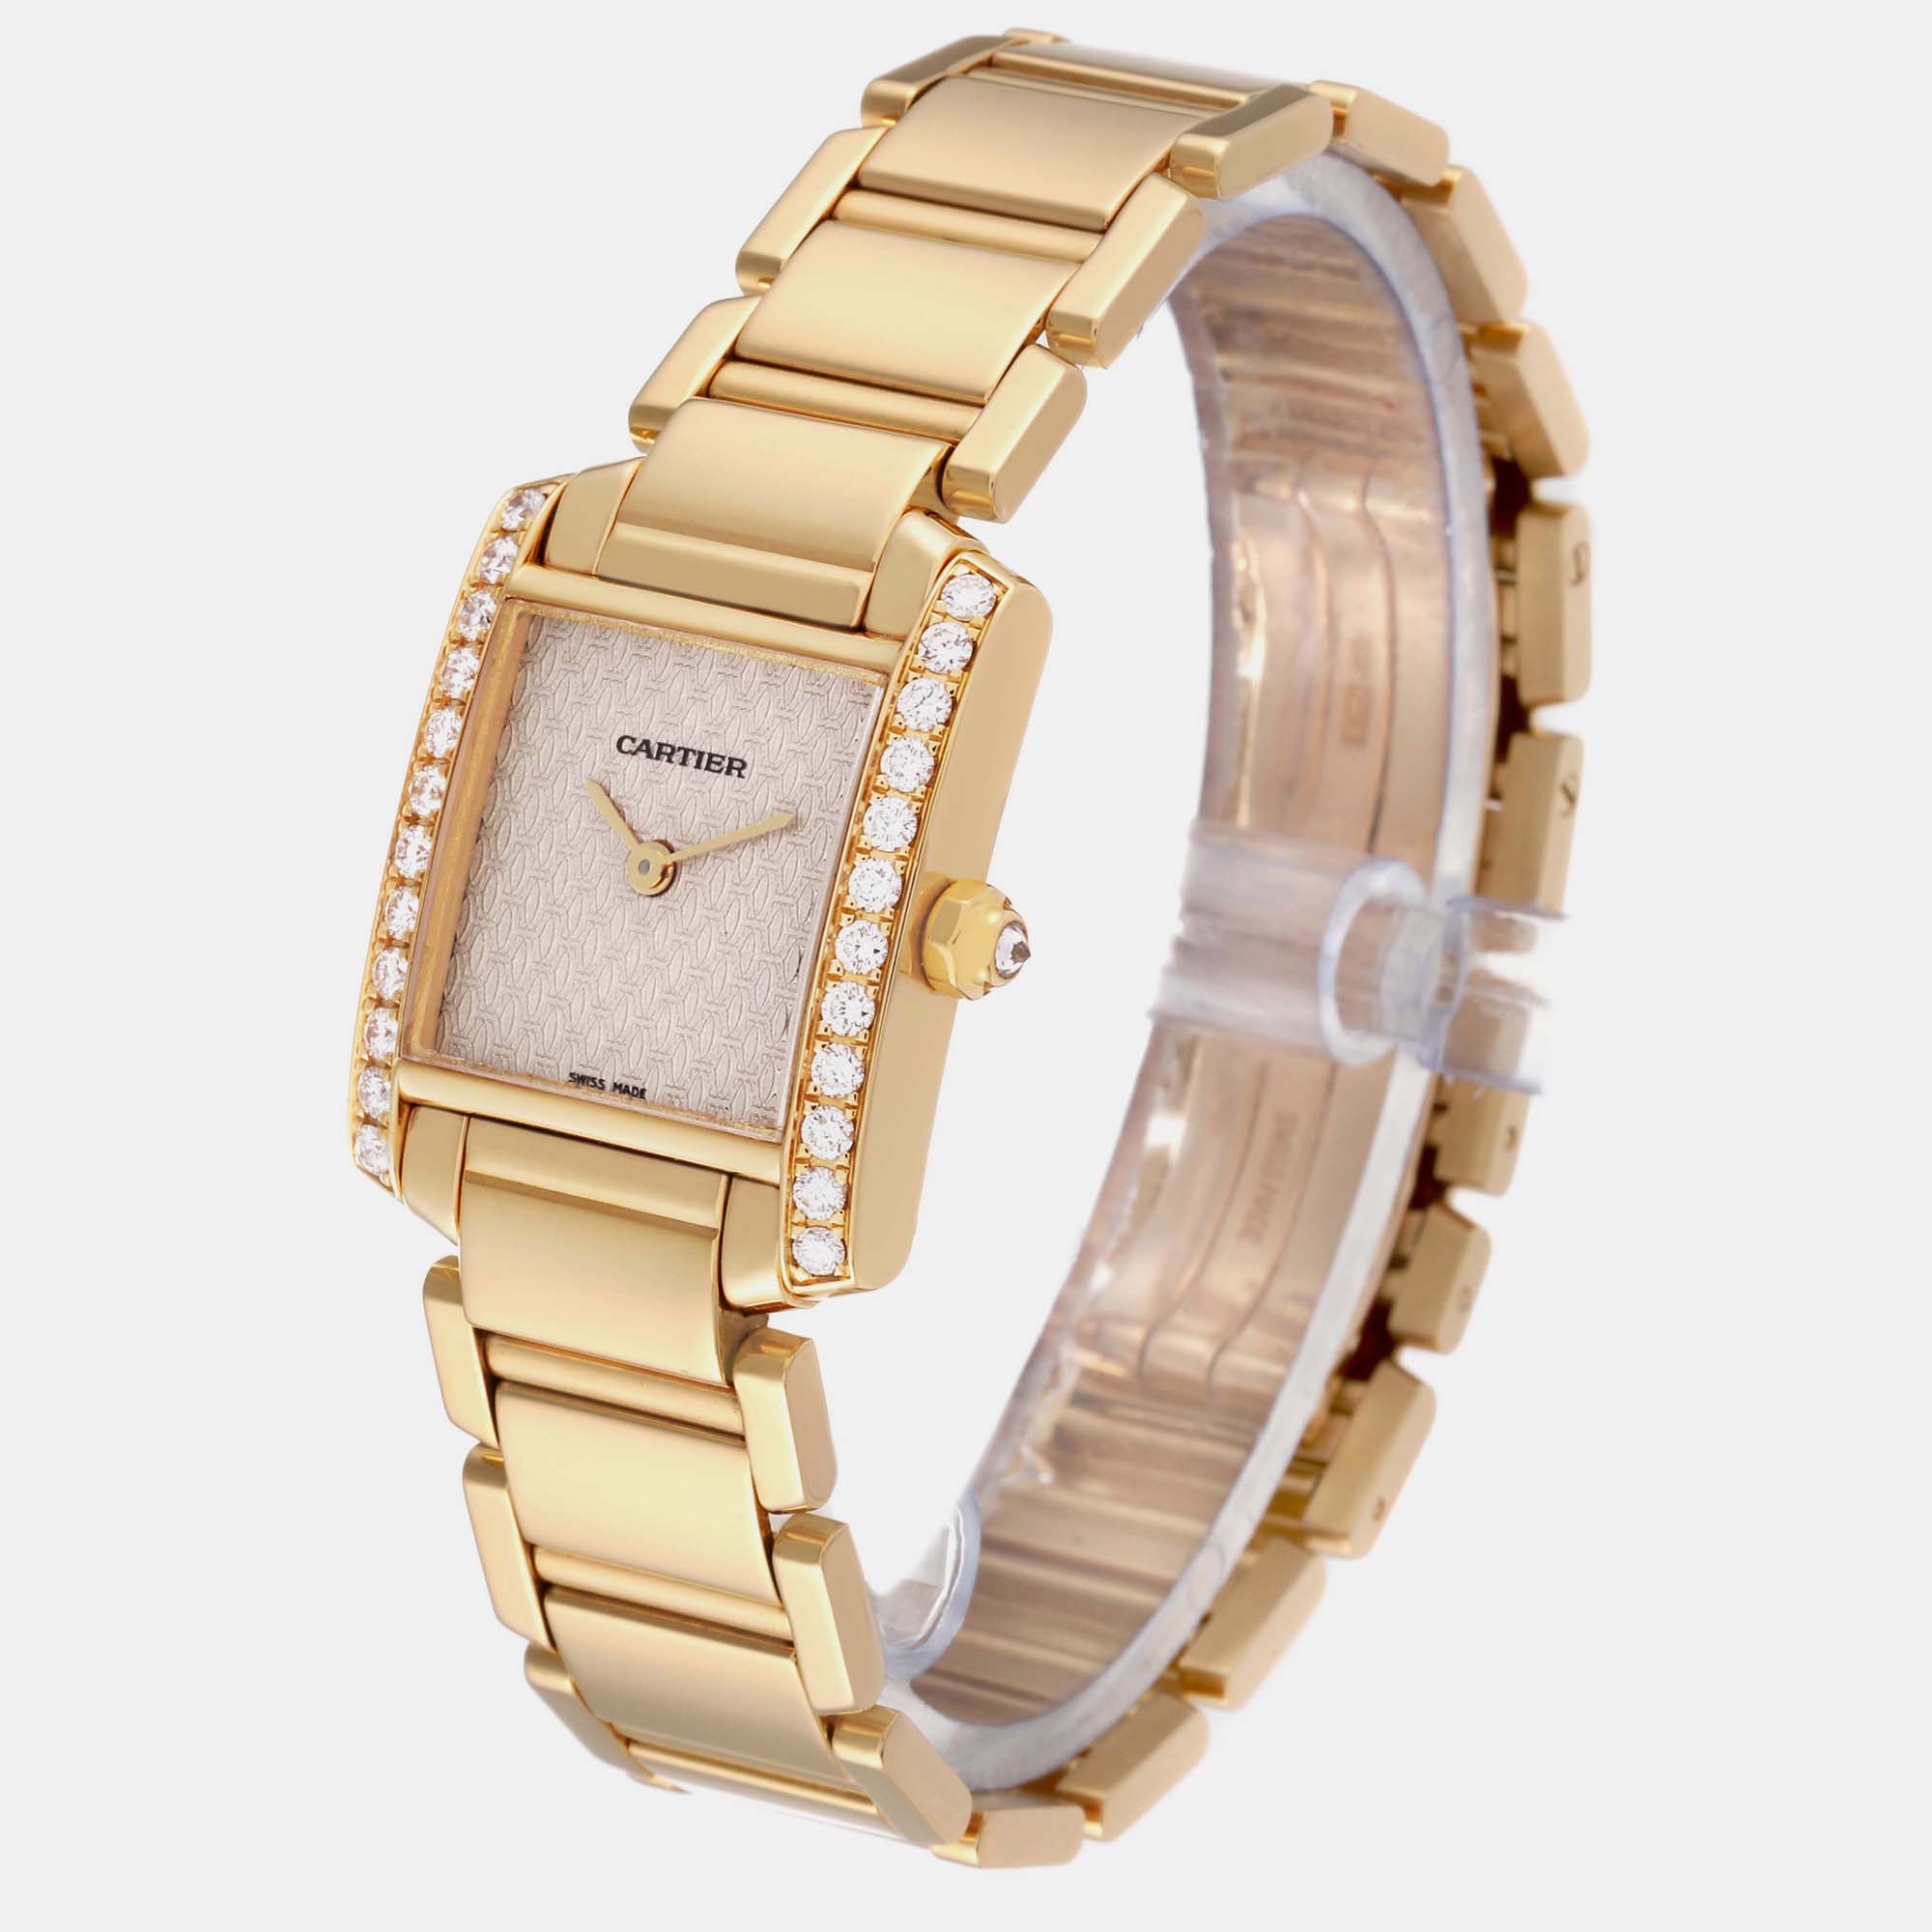 Cartier Tank Francaise Yellow Gold Rose Dial Diamond Ladies Watch WE1021R8 20 X 25 Mm